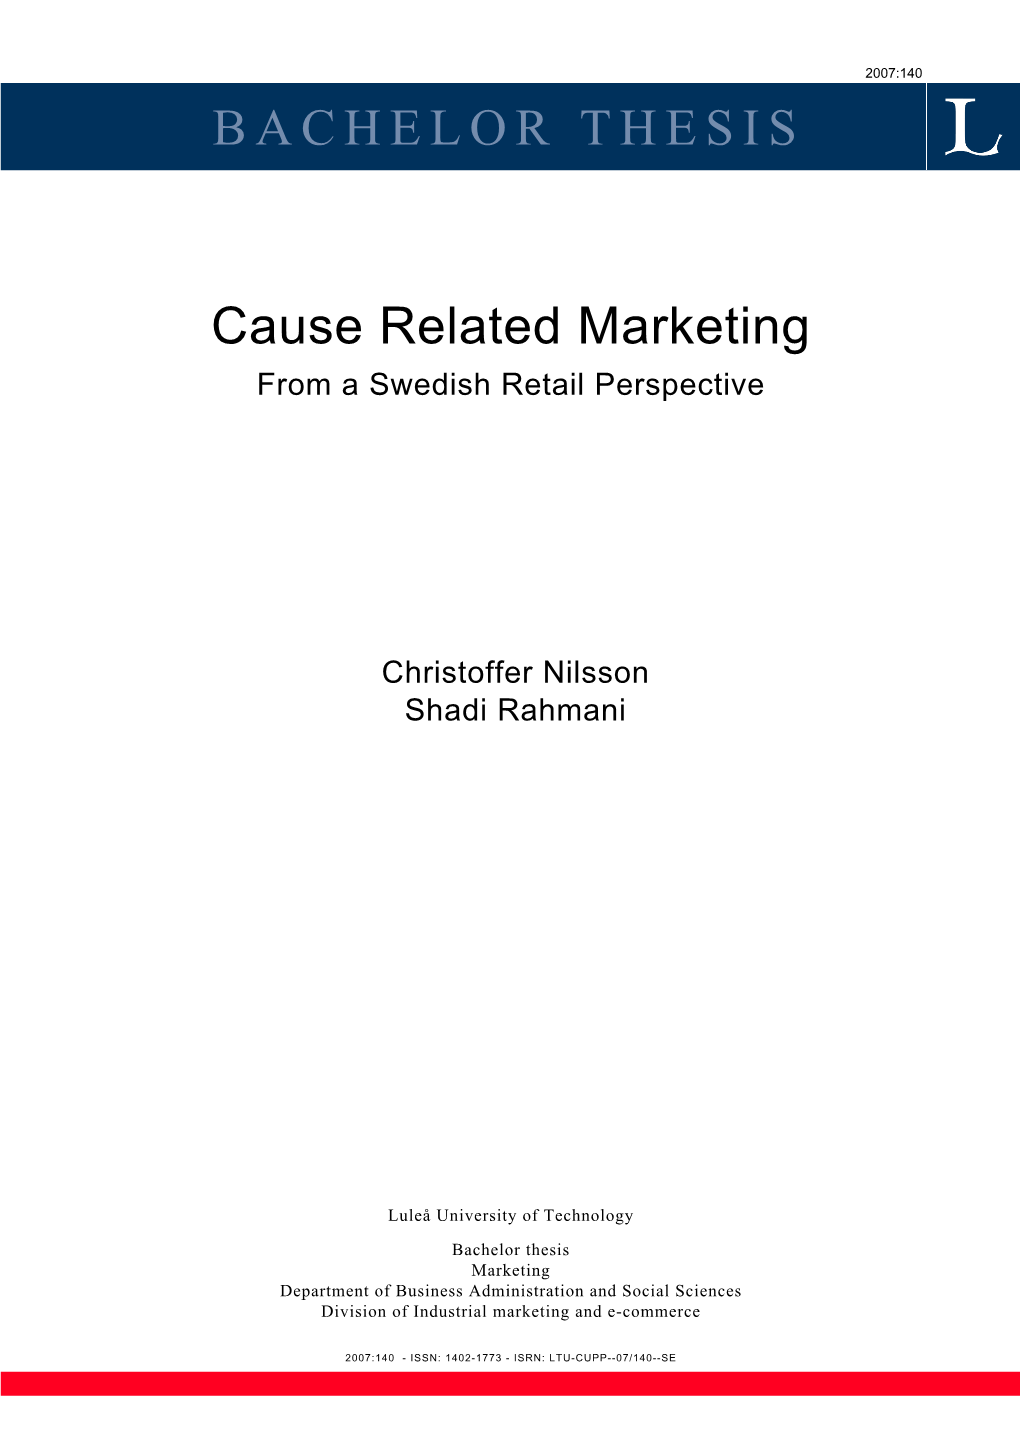 BACHELOR THESIS Cause Related Marketing